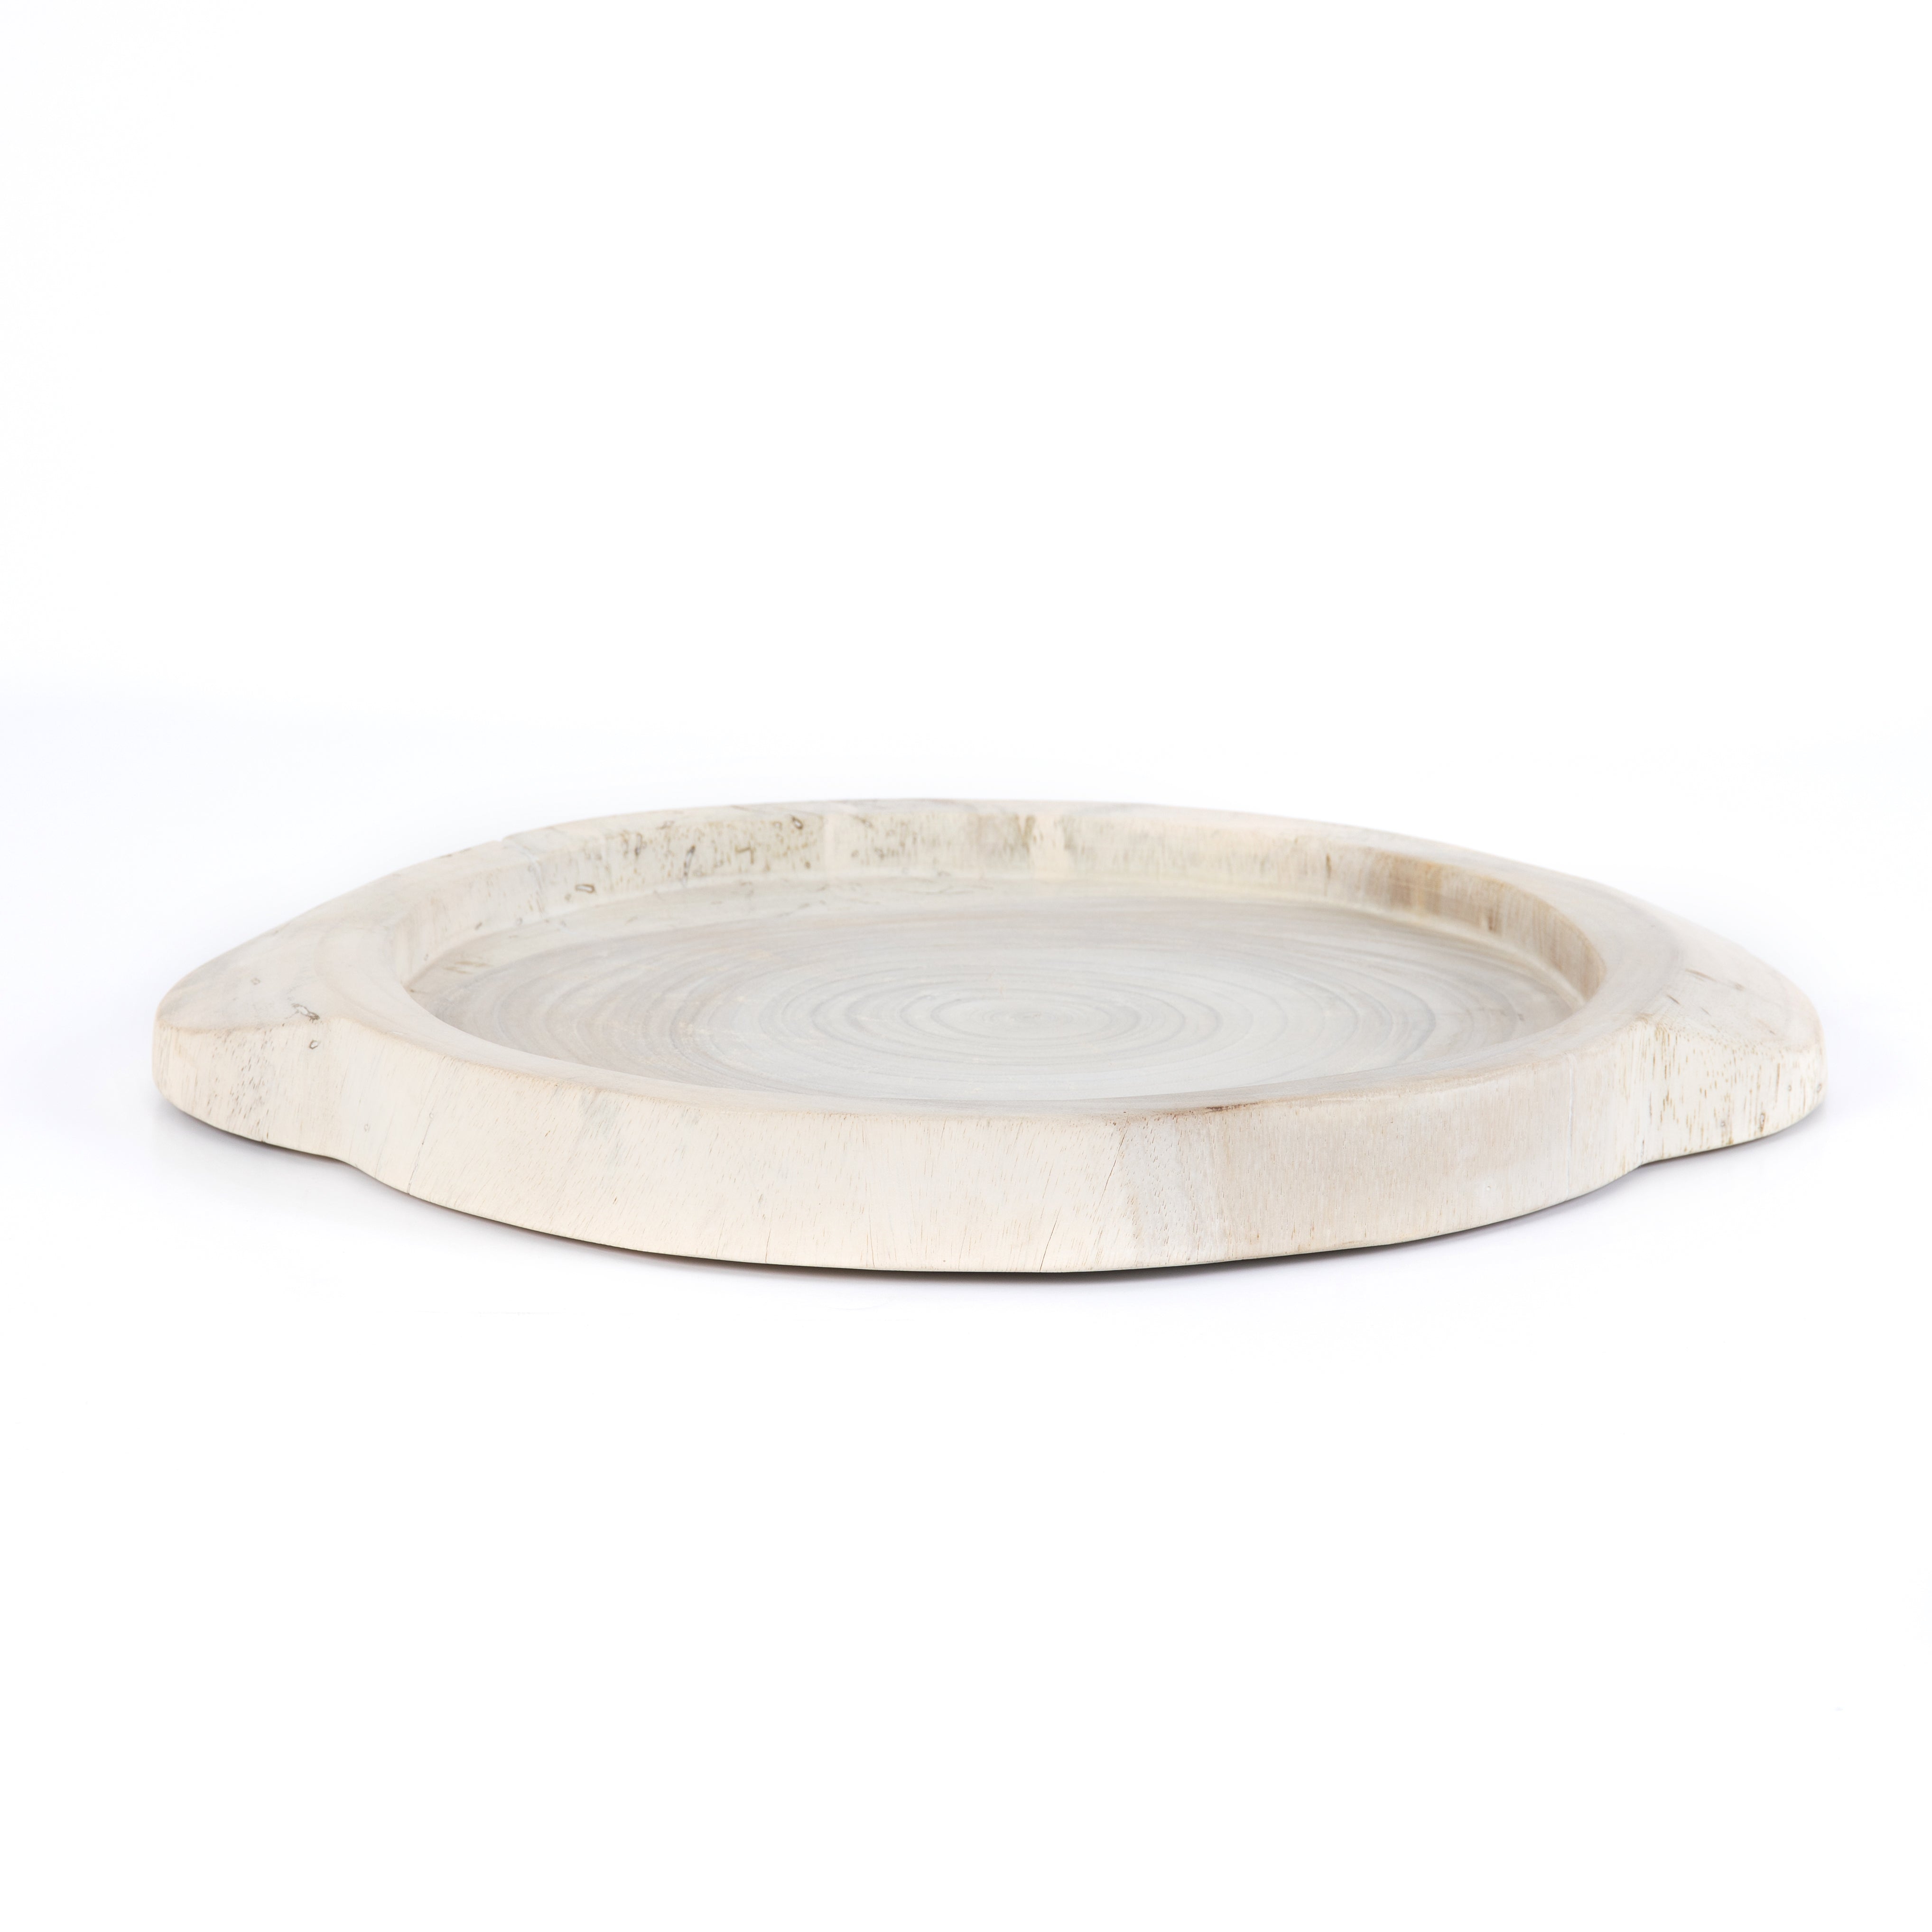 This Tadeo Round Tray - Ivory is made from reclaimed wood and has a gorgeous organic, earthy feel. Whether it's placed on your coffee table or in your kitchen, this will be your new favorite tray!  Amethyst Home celebrates natural materials, which often comes with beautiful imperfections. Each piece is made uniquely for you, please expect some variation and character. We embrace the design approach of Wabi Sabi!  Overall Dimensions: 23.50"w x 19.75"d x 1.75"h Colors: Ivory Materials: Solid Reclaimed Wood